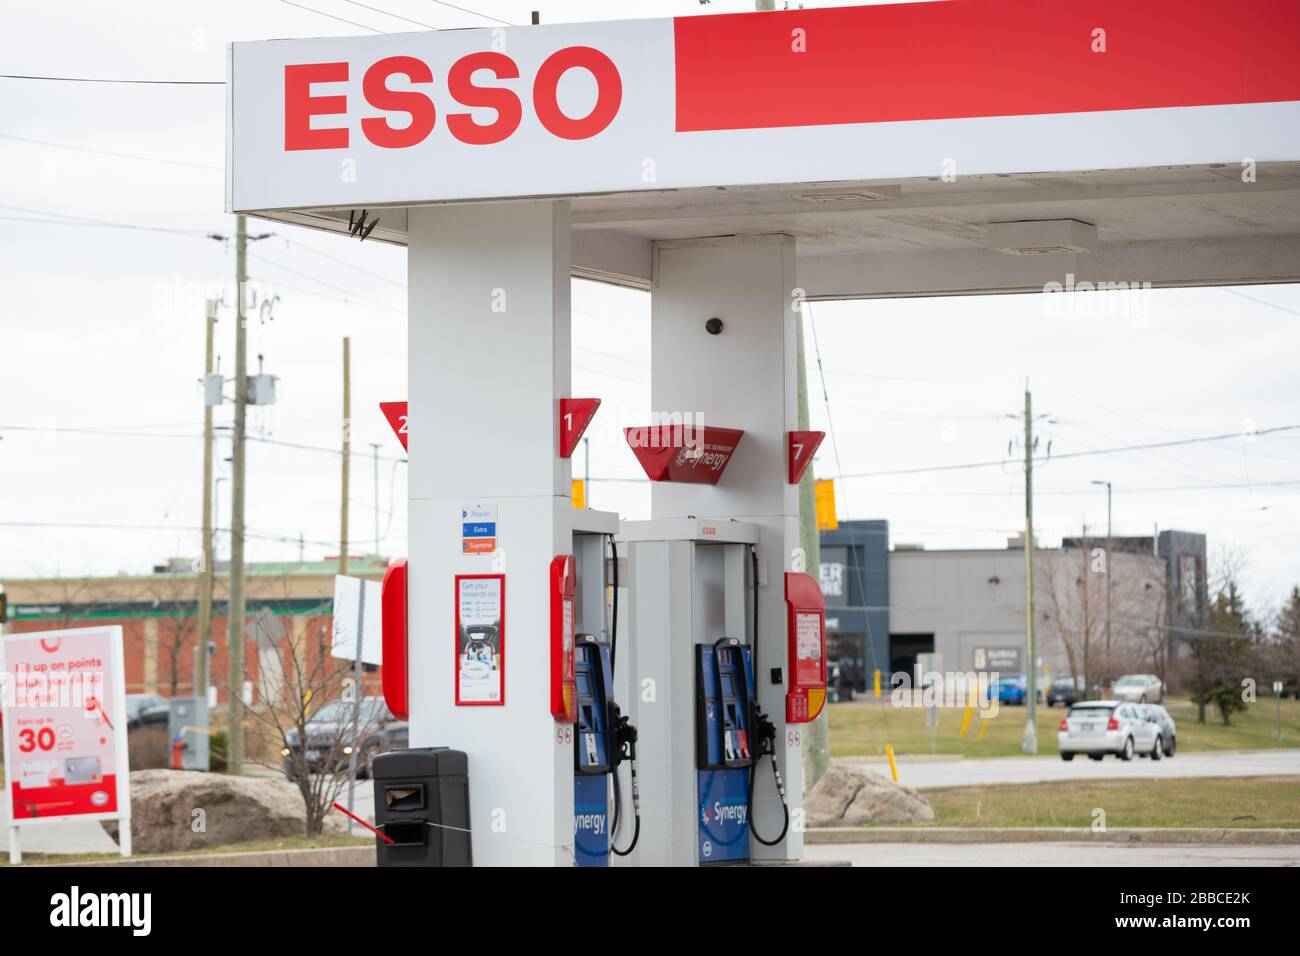 View showing a section of an Esso gas station Stock Photo